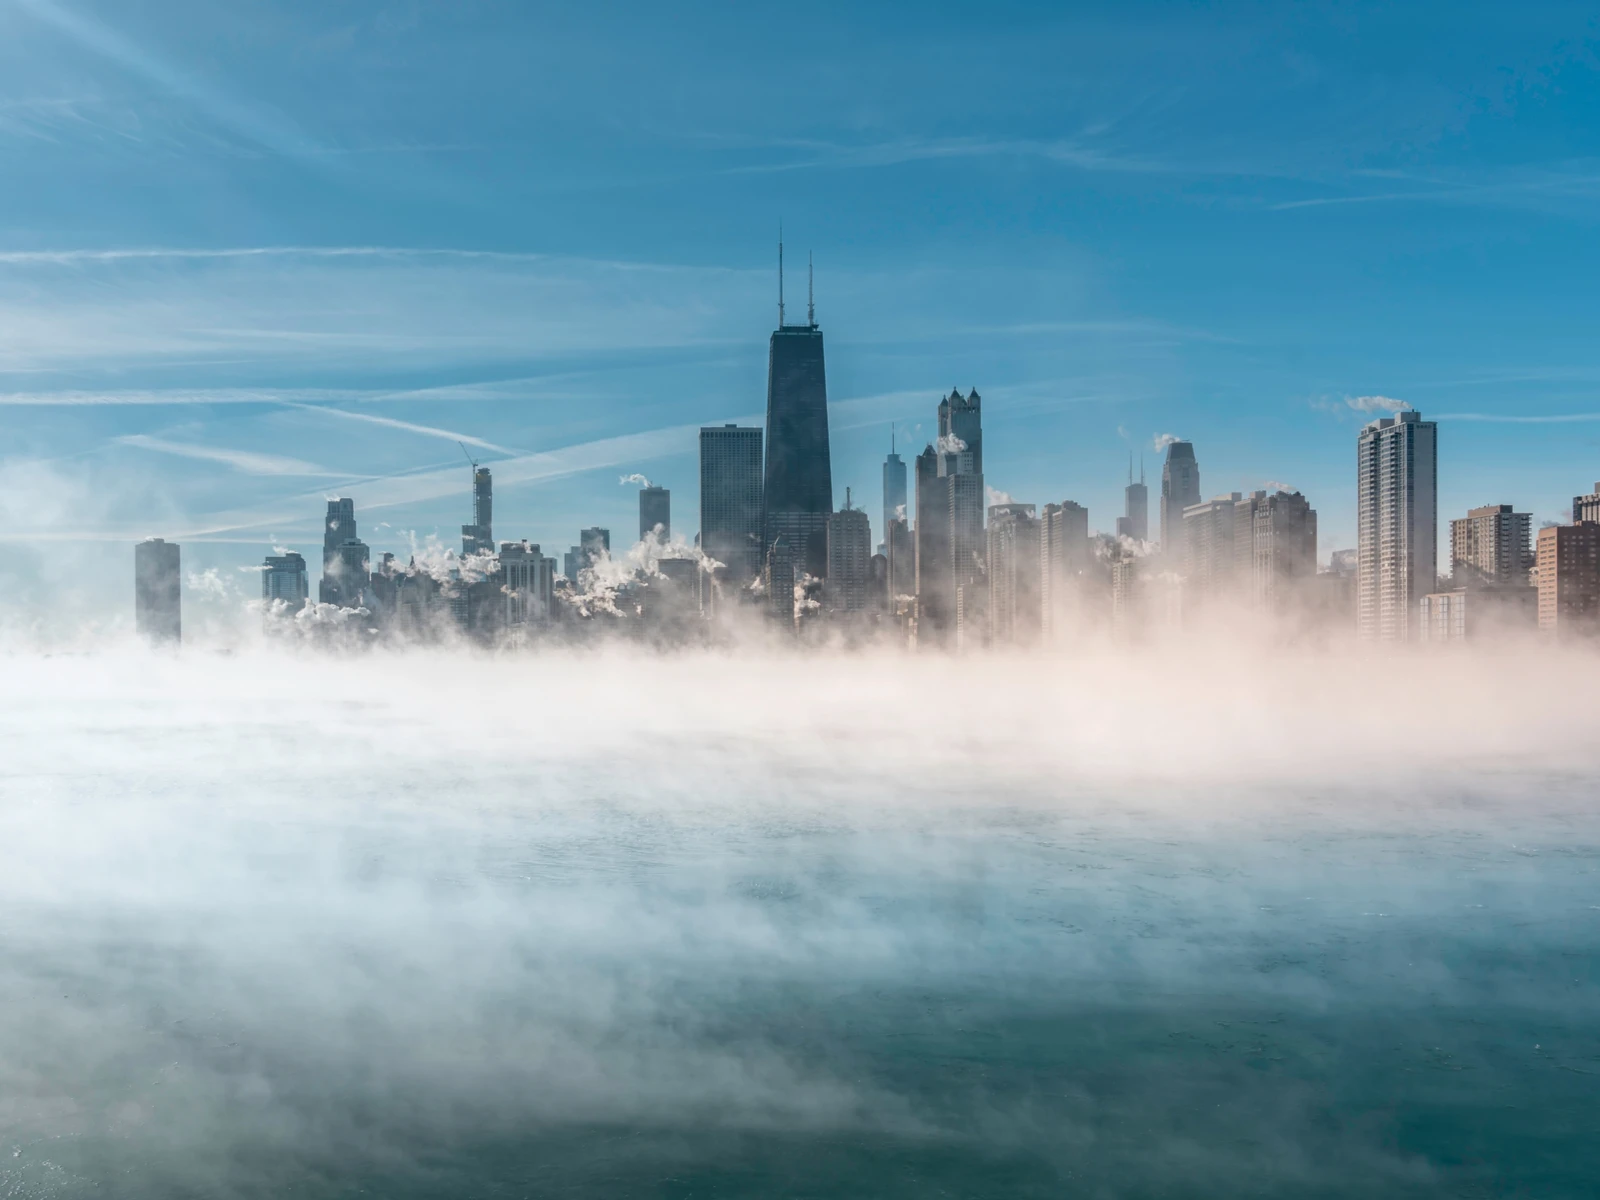 Worst time to visit Chicago symbolized by a photo of Lake Michigan with lots of fog and snow